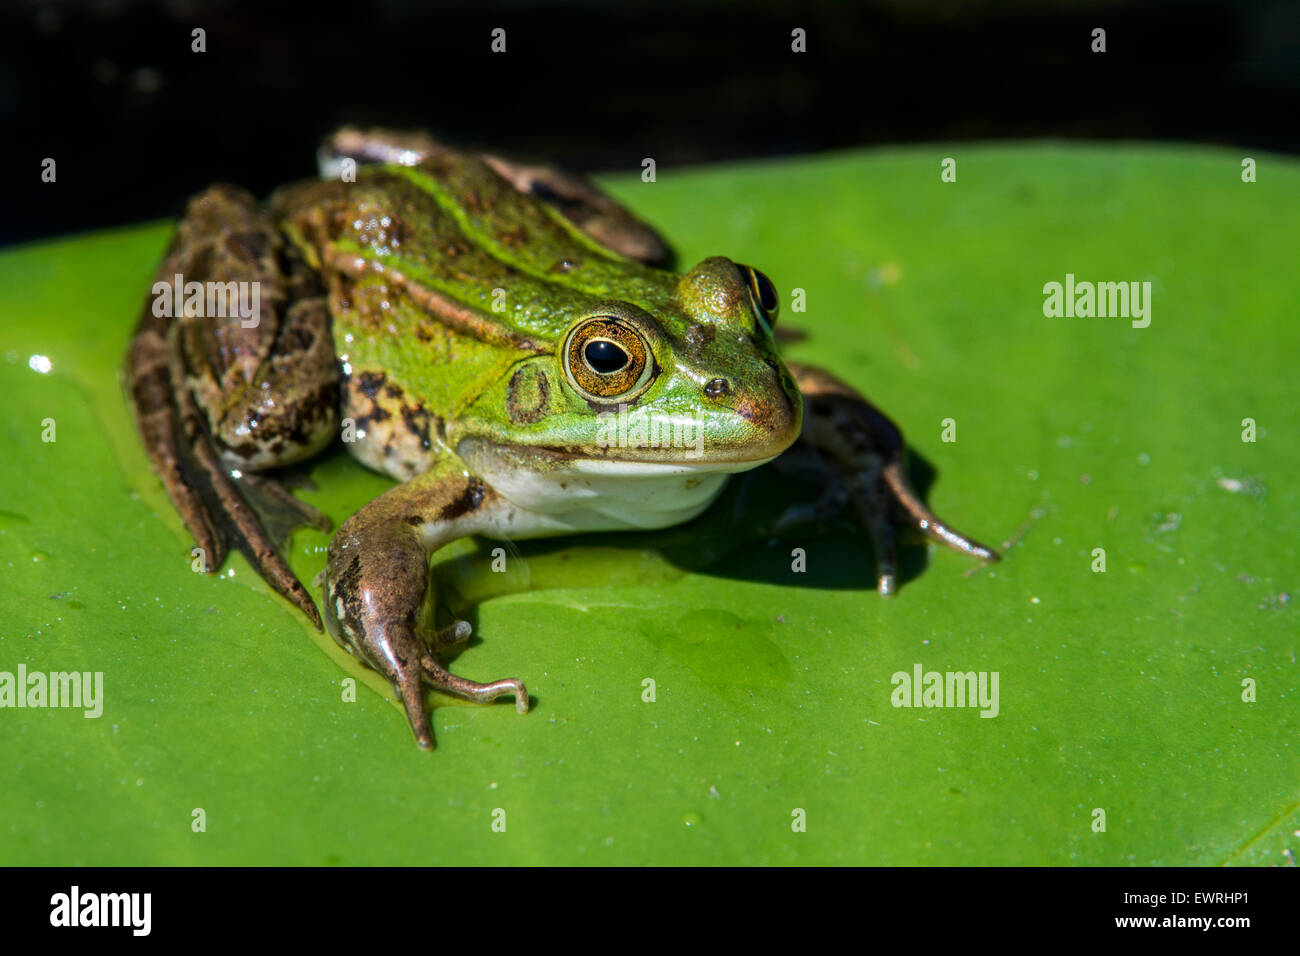 Edible frog / common water frog / green frog (Pelophylax kl. esculentus / Rana kl. esculenta) on floating leaf of waterlily Stock Photo